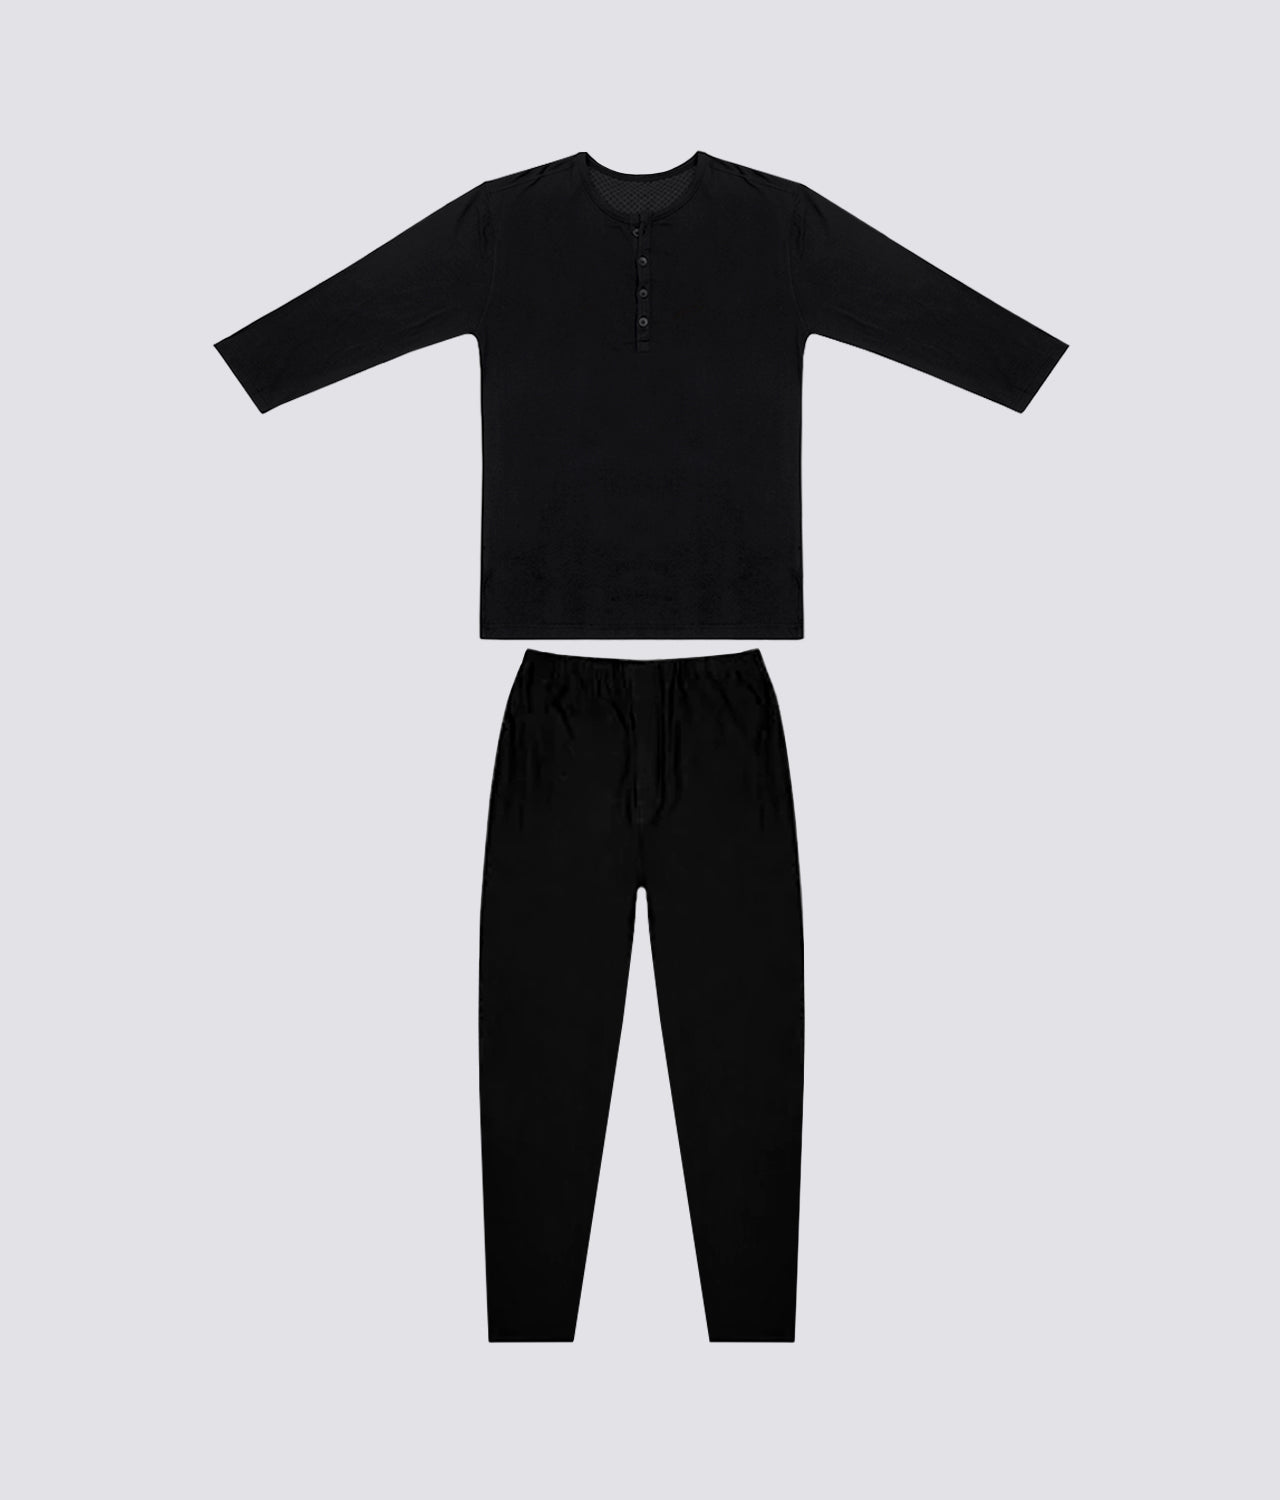 Adults' Black Athletic Recovery Wear